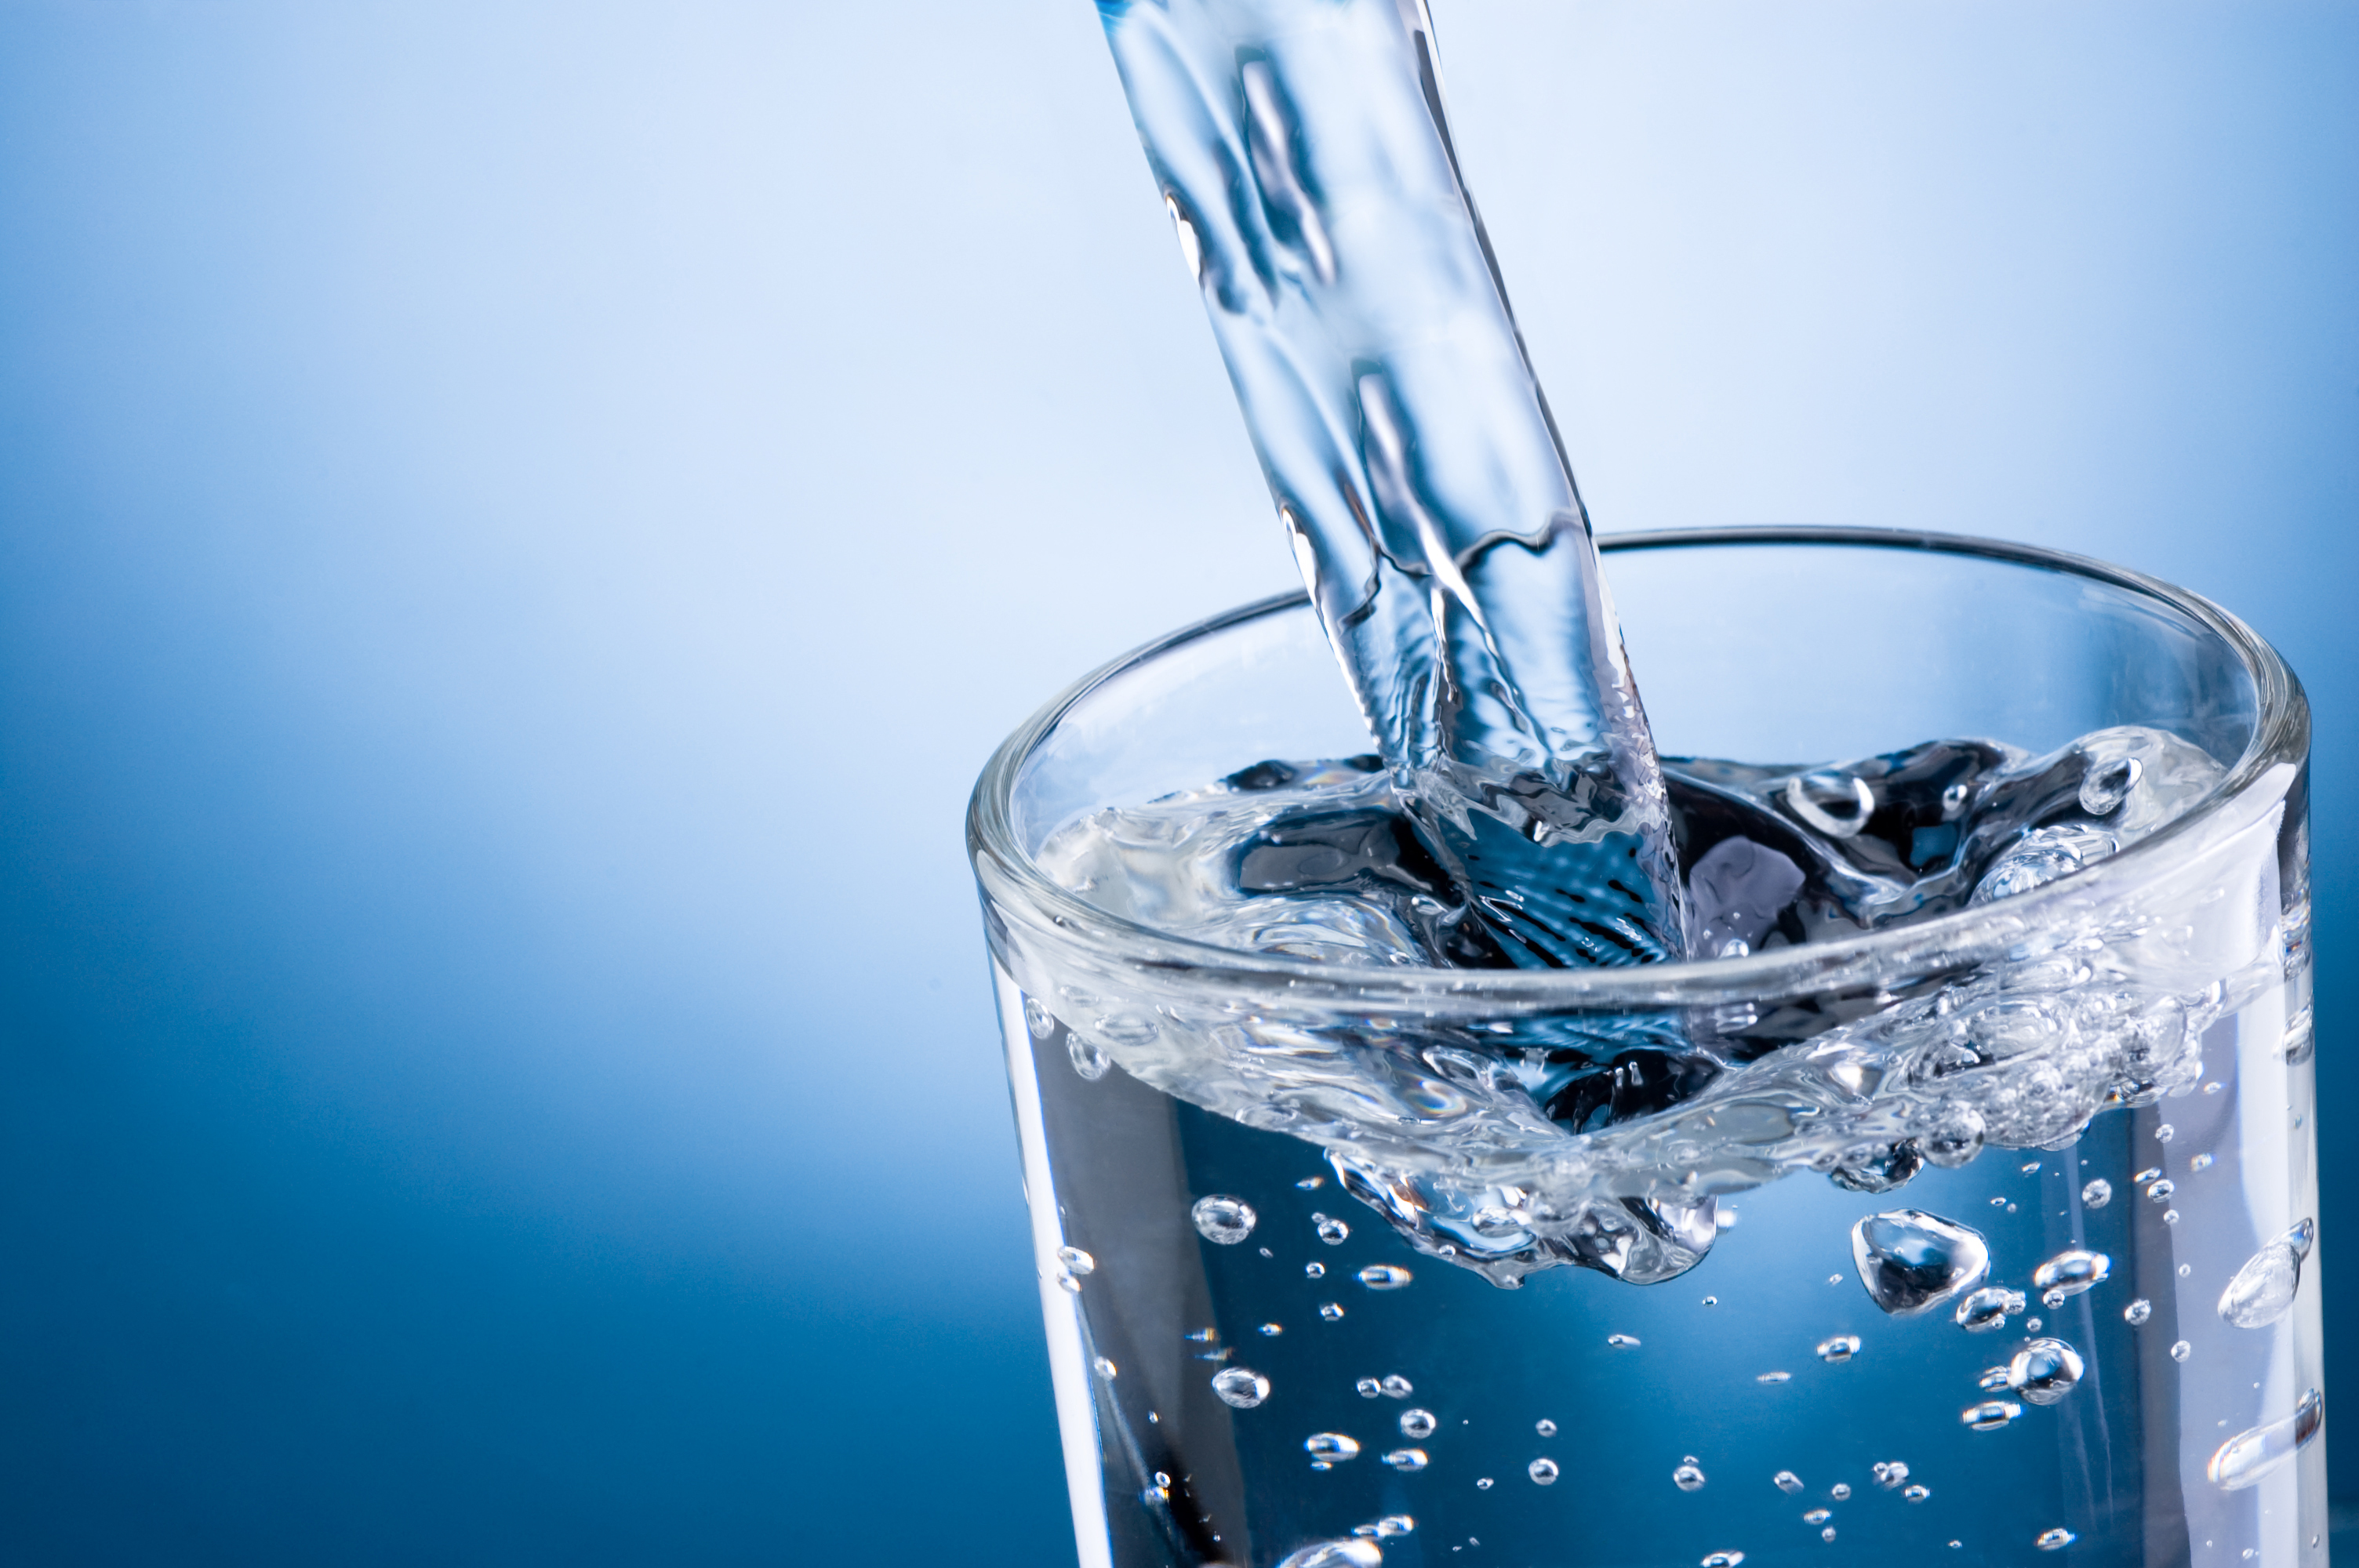 Hydration – How Much Water Should I Drink?